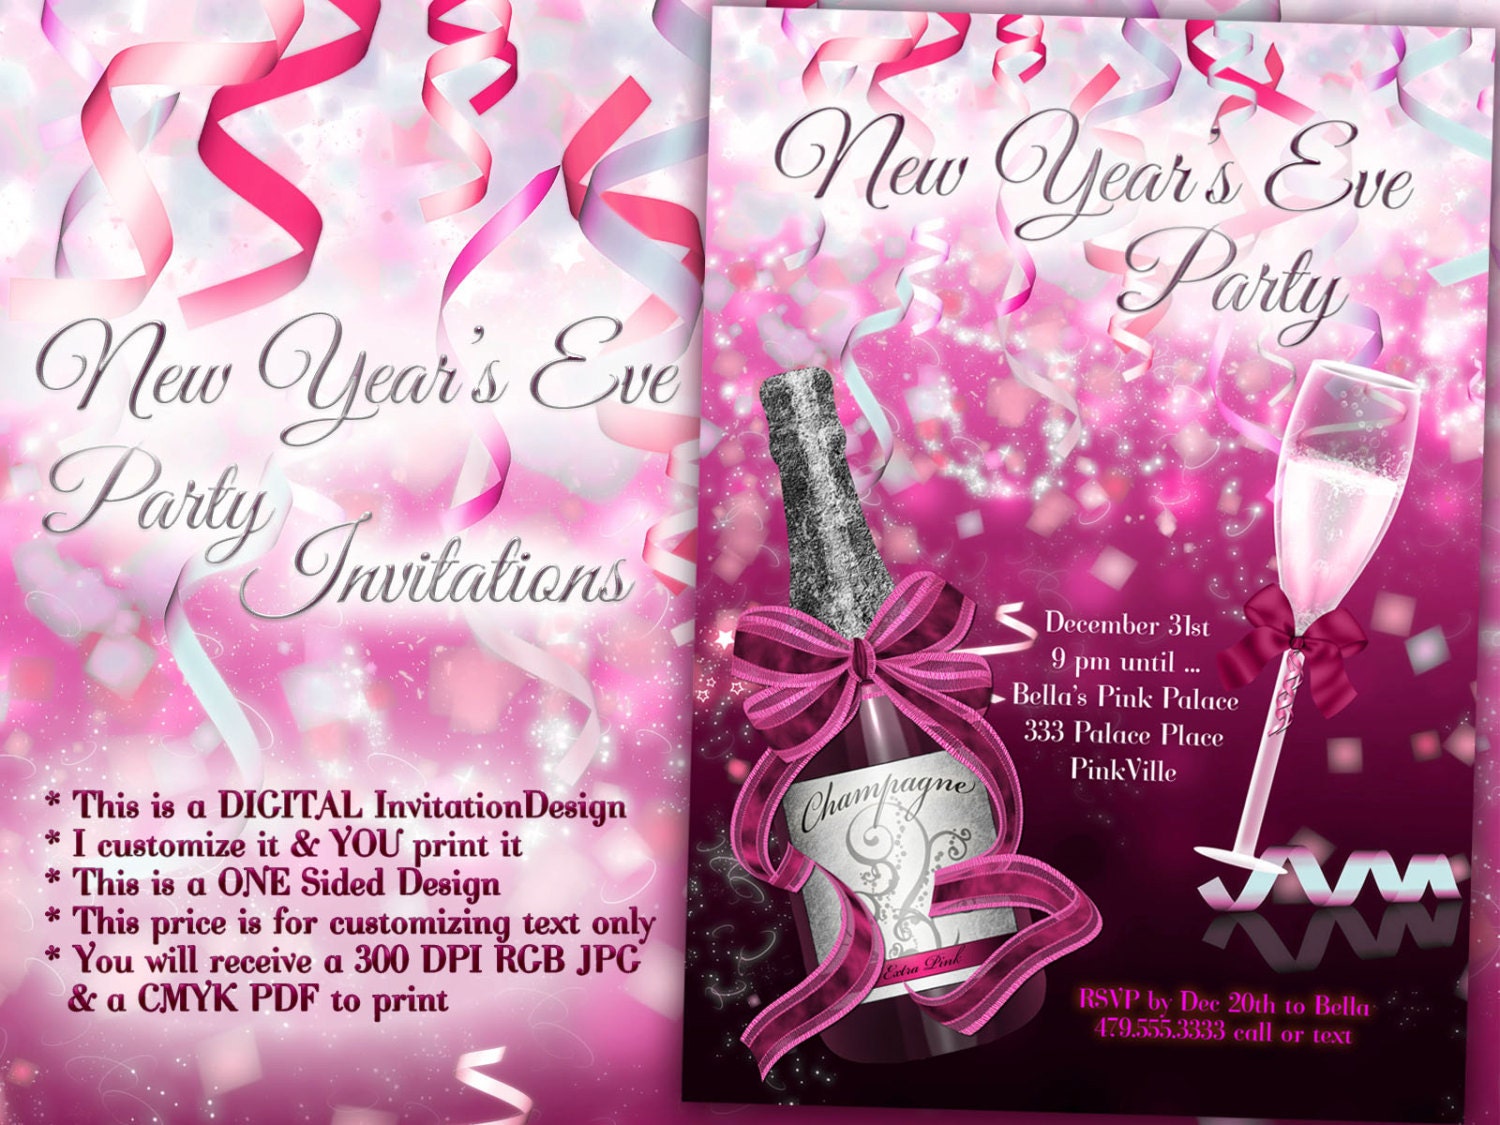 New Years Eve Party Invitation 2015 New Years New Year Party